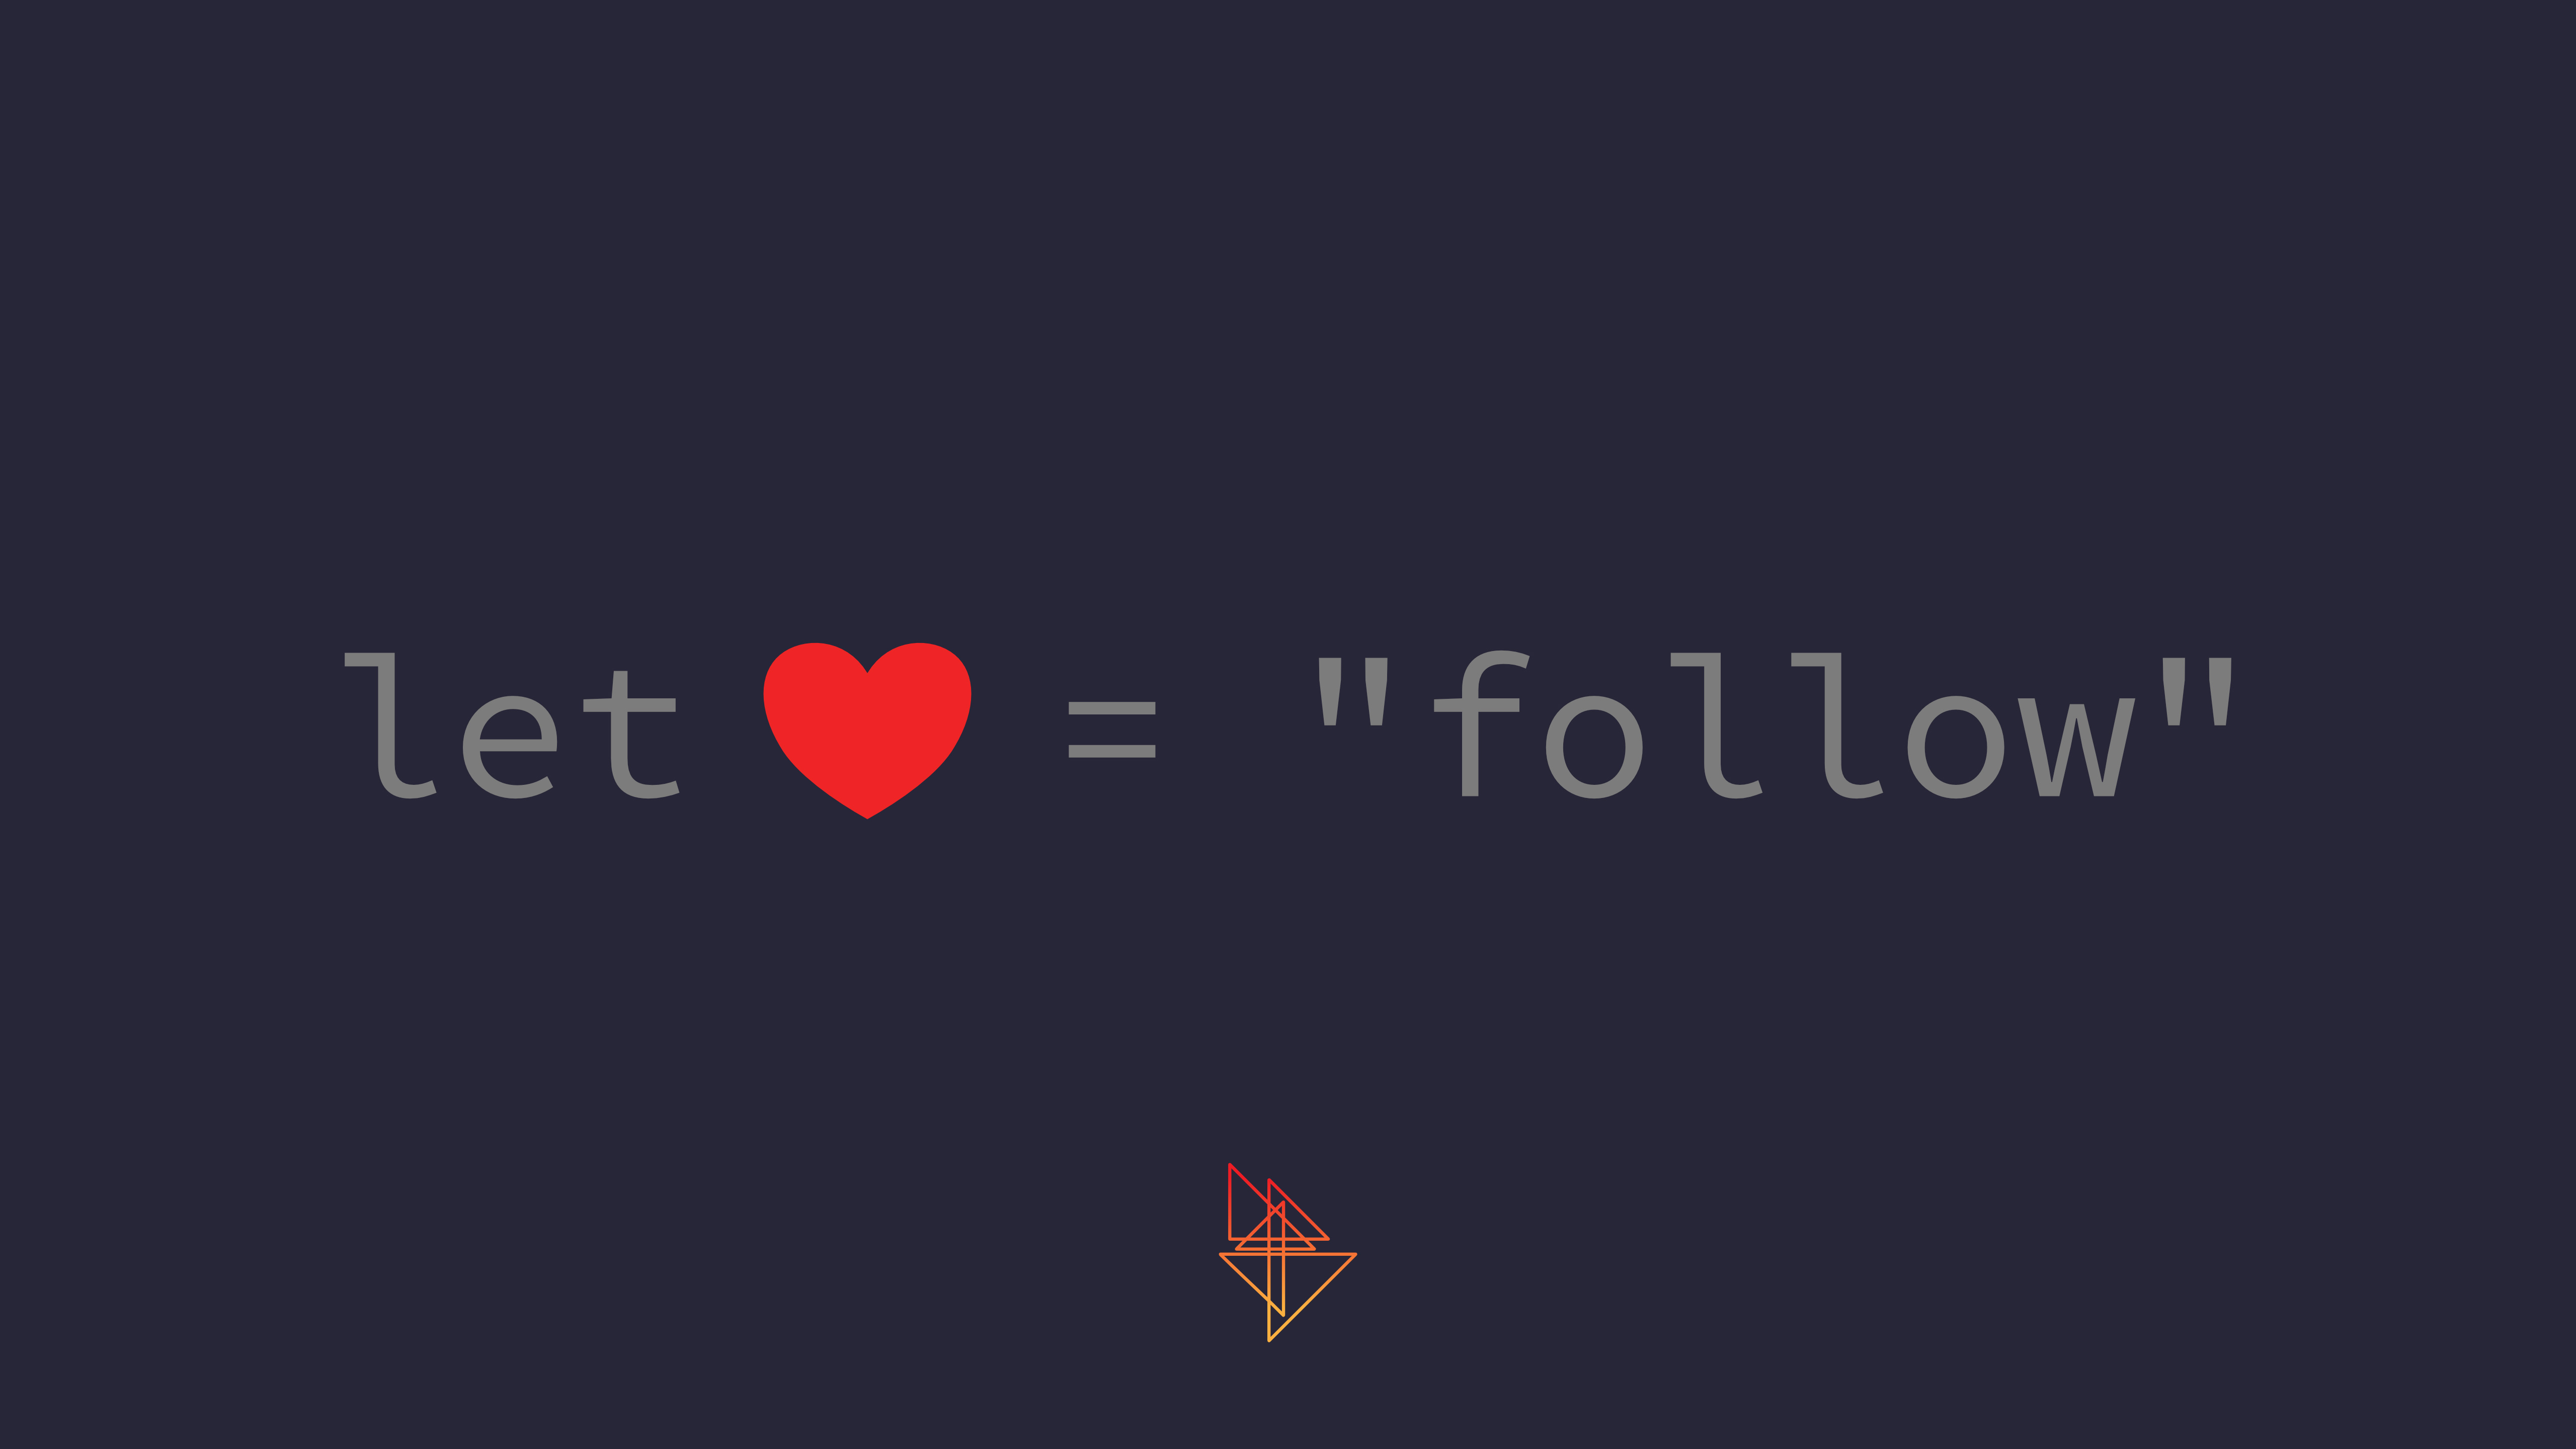 Swift Programming Code Love Typography Wallpaper,HD Computer Wallpapers,4k  Wallpapers,Images,Backgrounds,Photos and Pictures